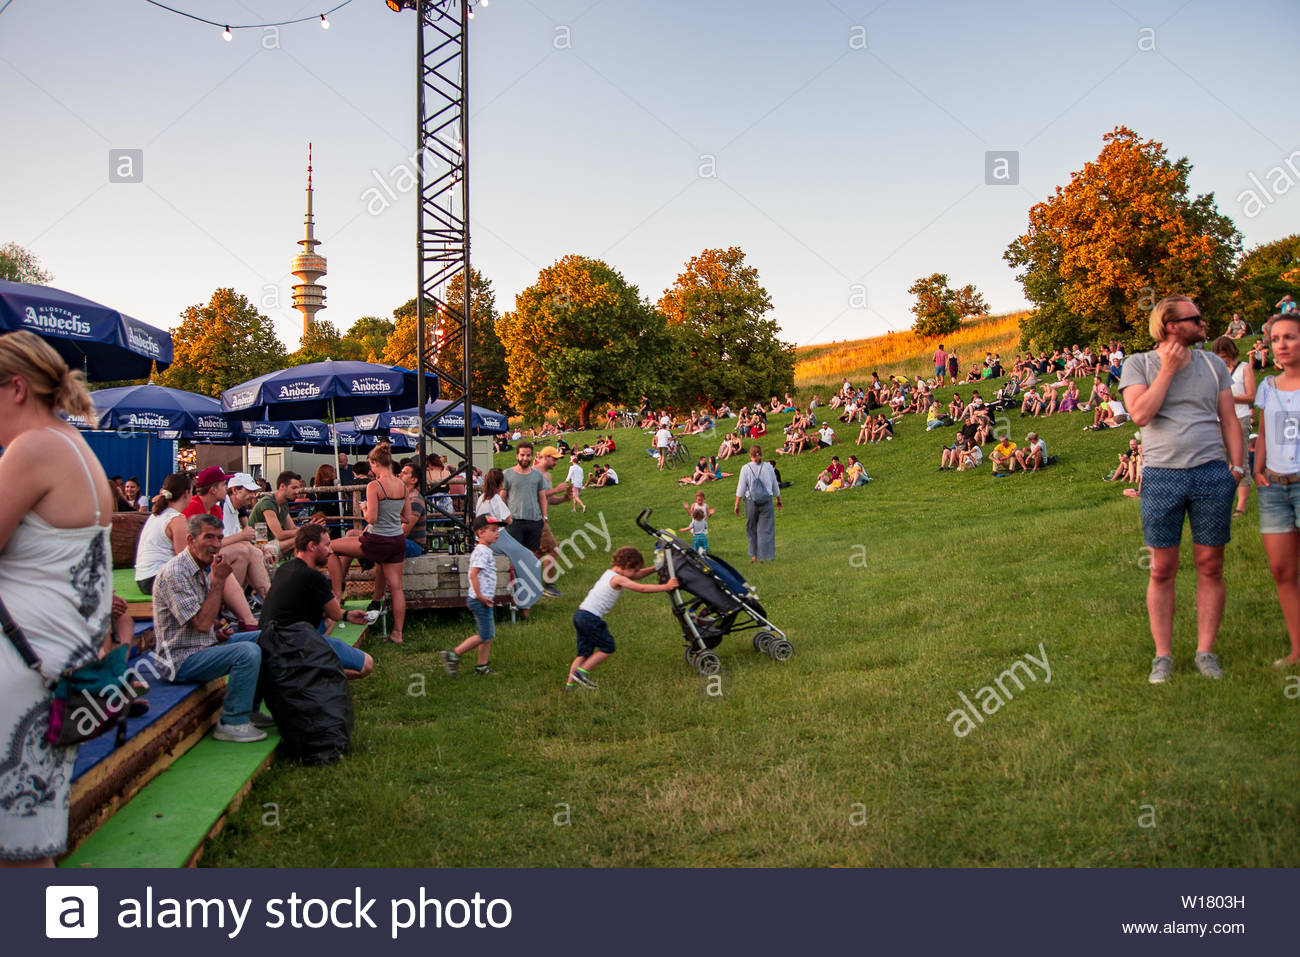 People Watch The Sunset At Festival Ground With Olympia